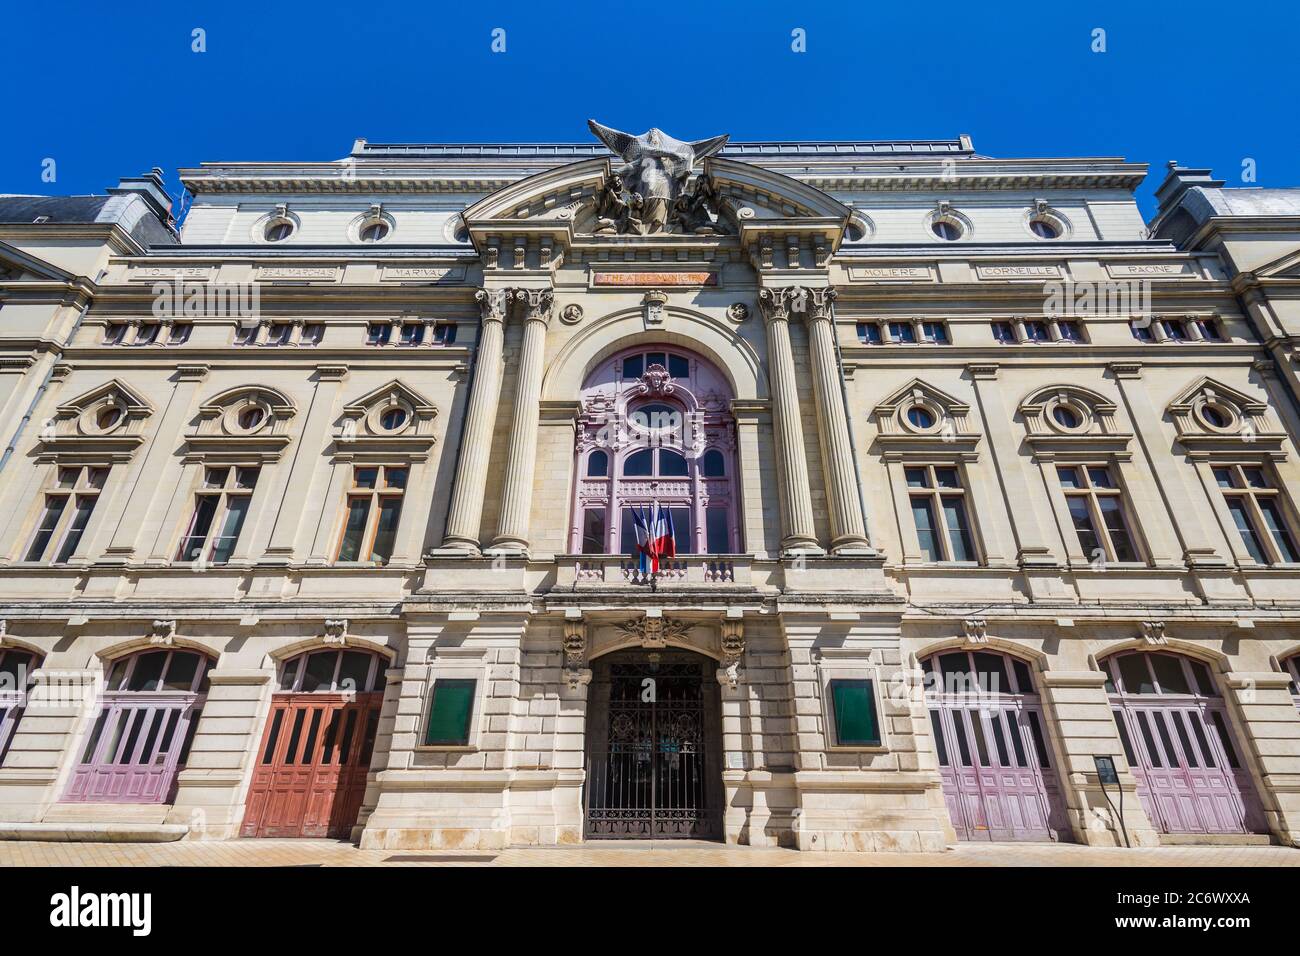 Classical 19th century frontage of the Grand Theatre / Opera House, Tours Indre-et-Loire, France. Stock Photo